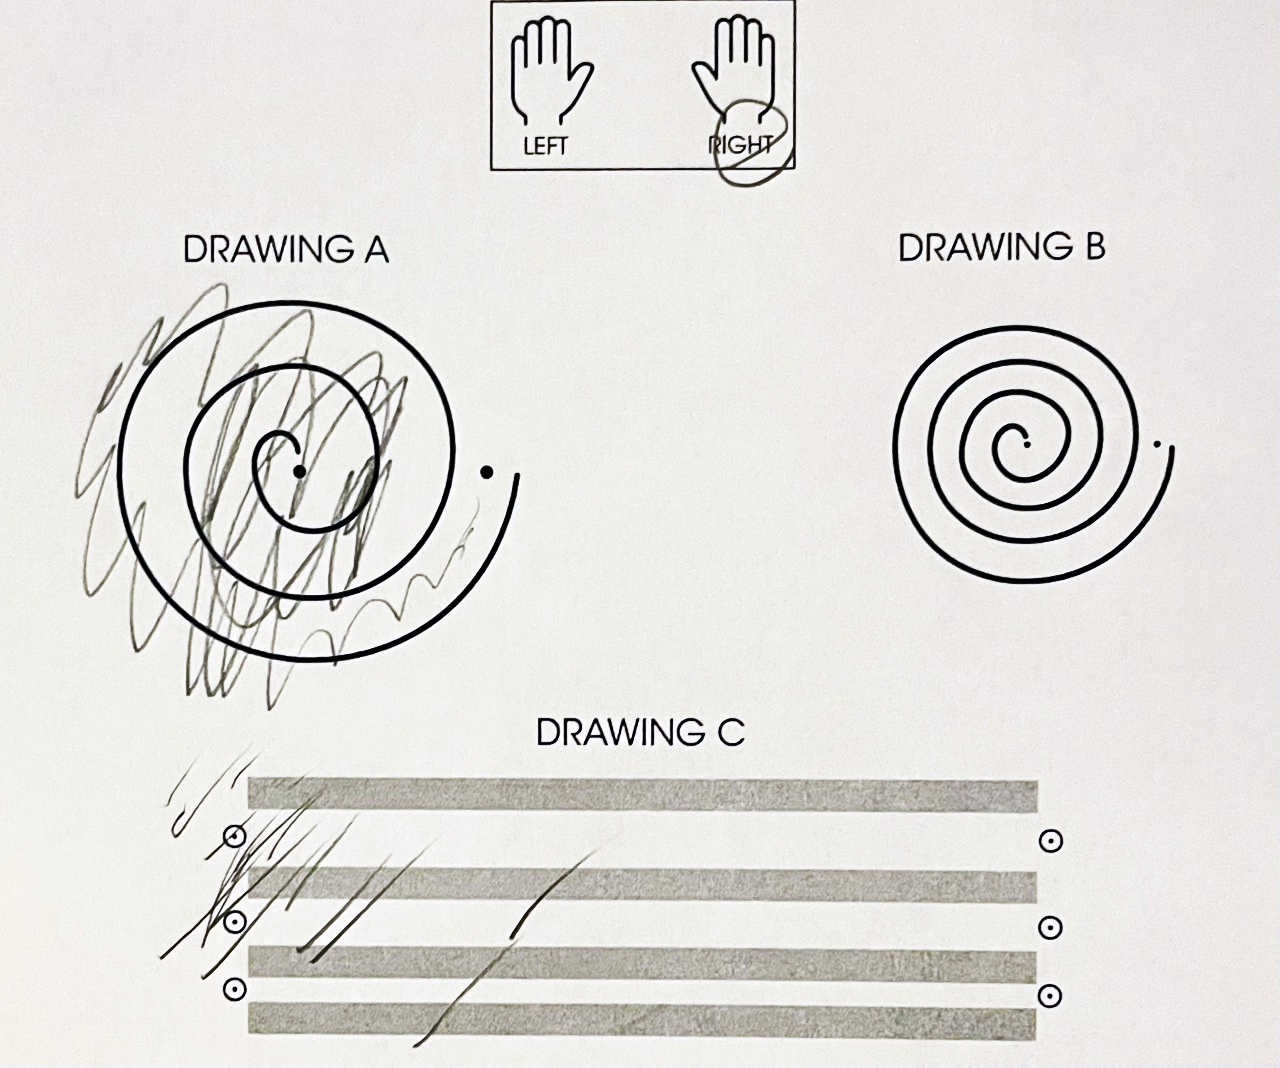 A printed spiral copied by hand before treatment to test the effect of a patients essential tremor